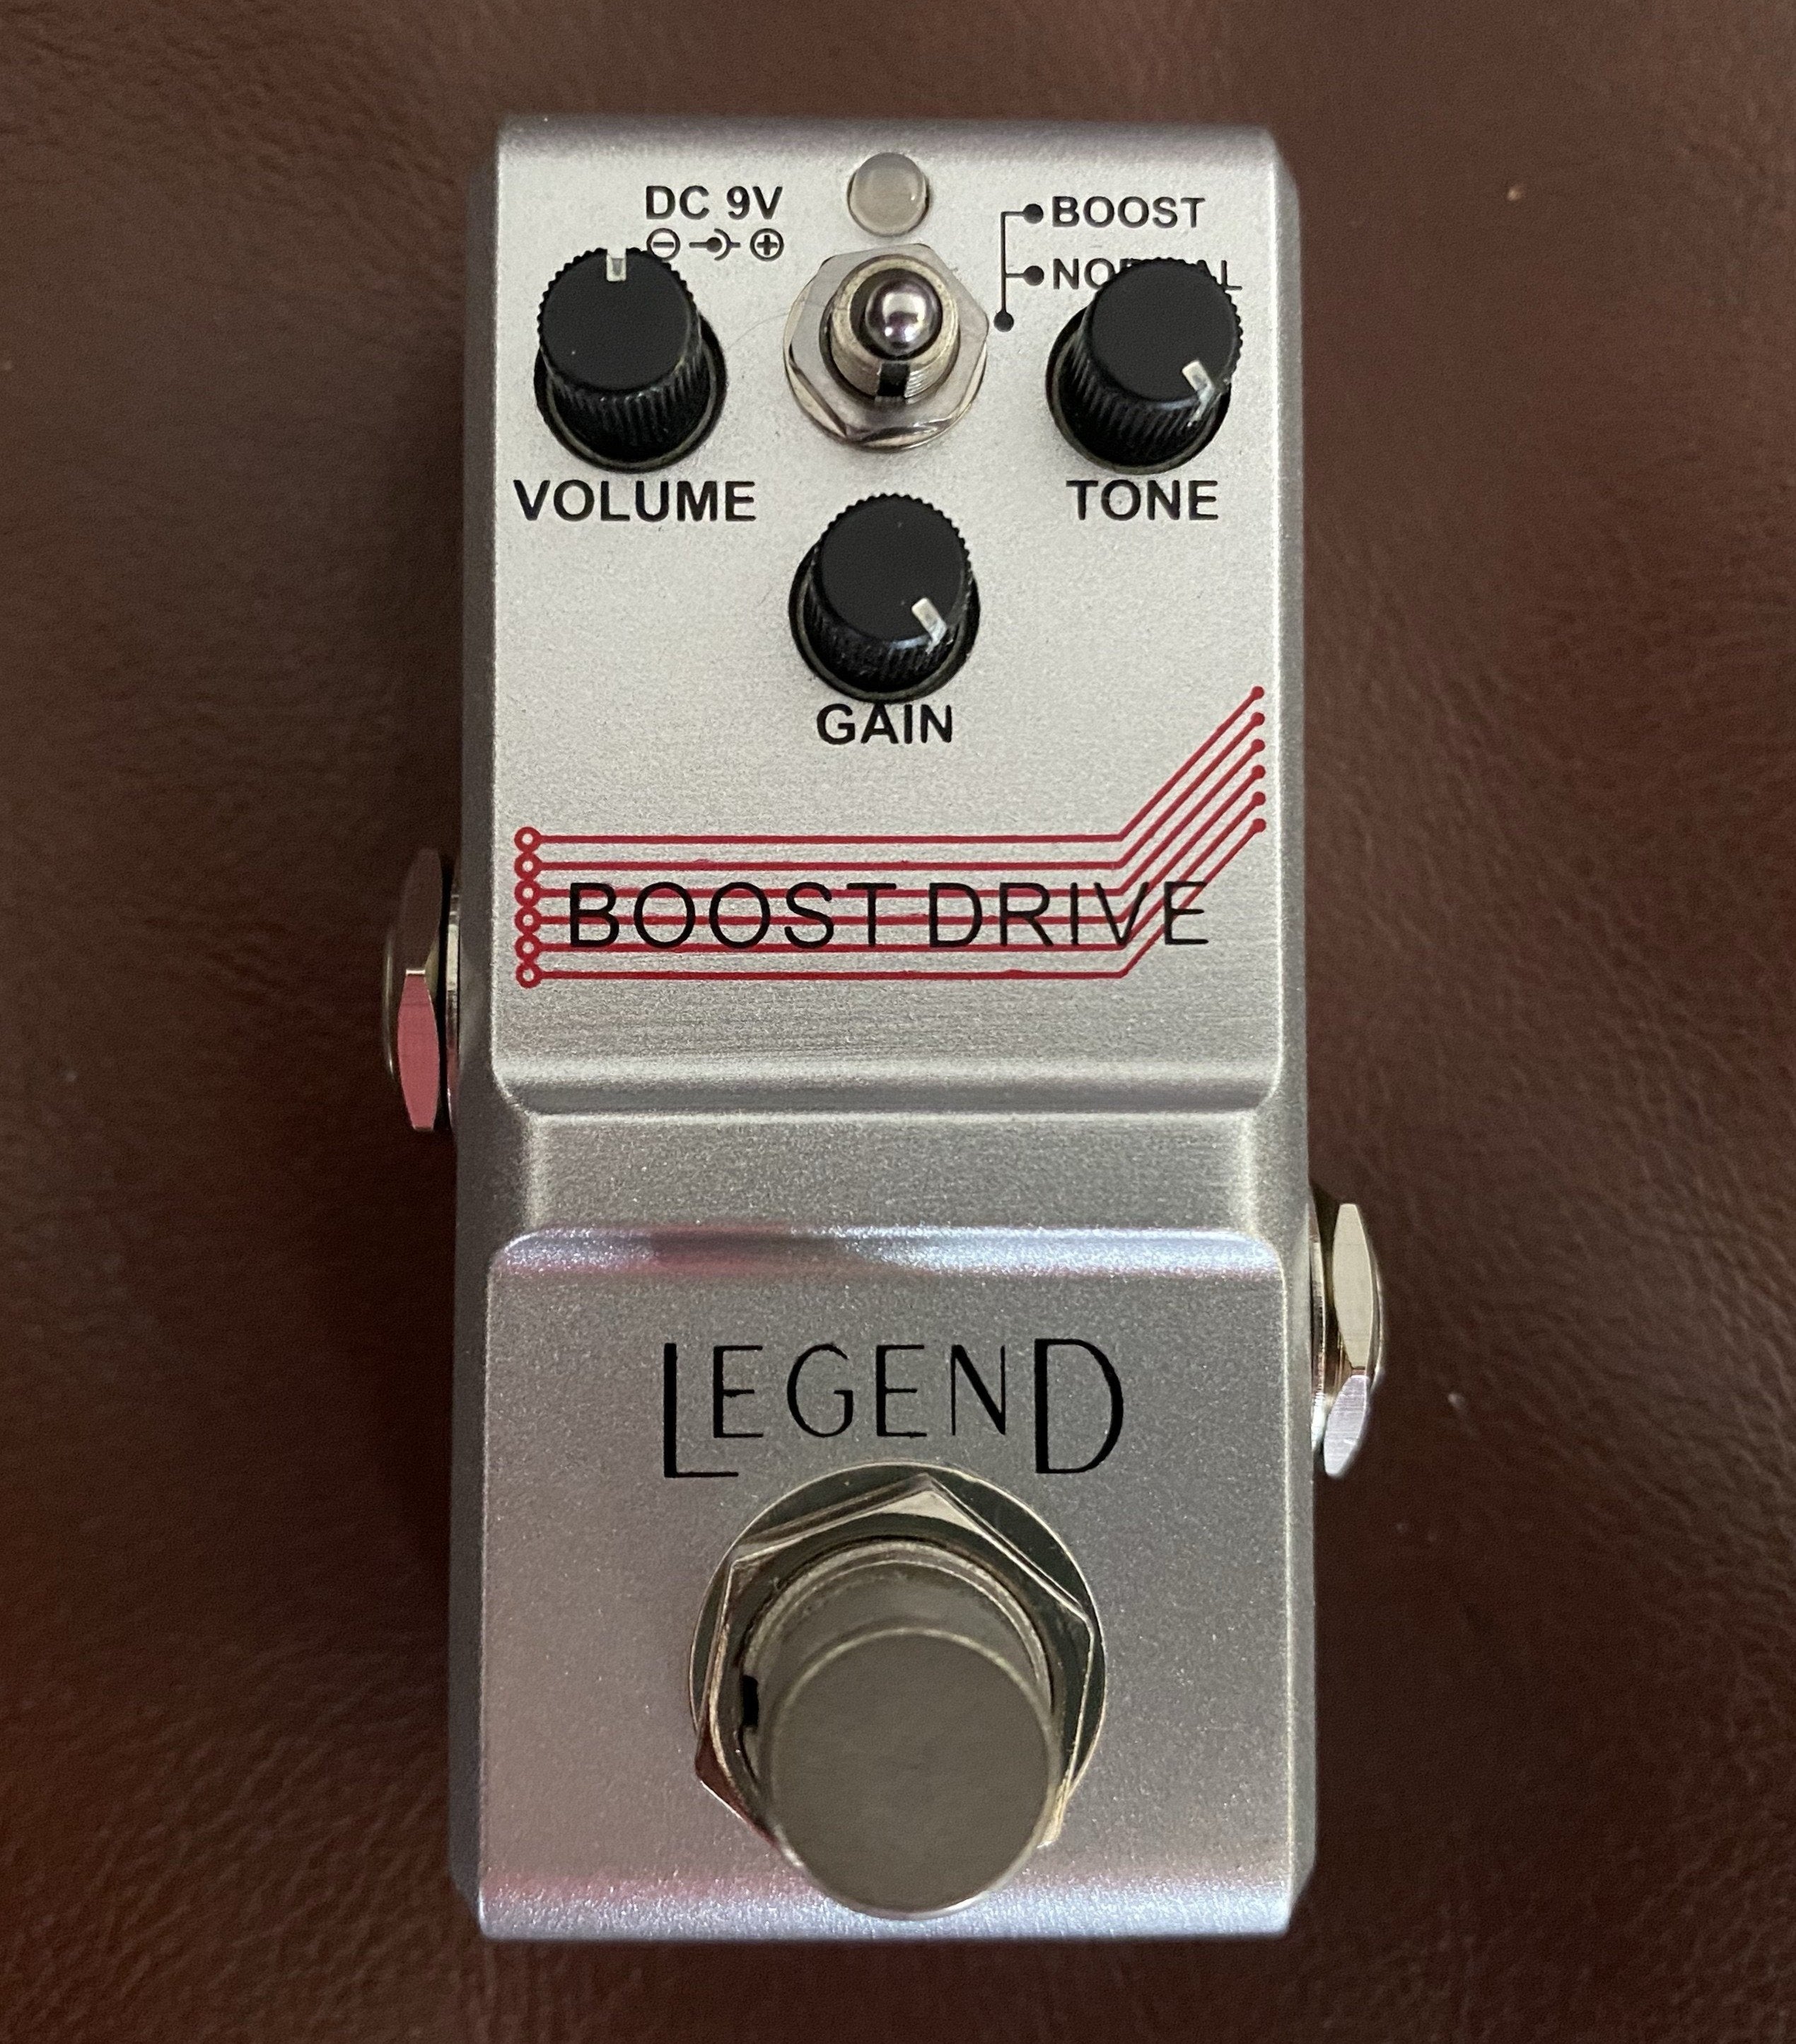 SMJ LEGEND Series Boost Drive Pedal, Accessory for sale at Richards Guitars.